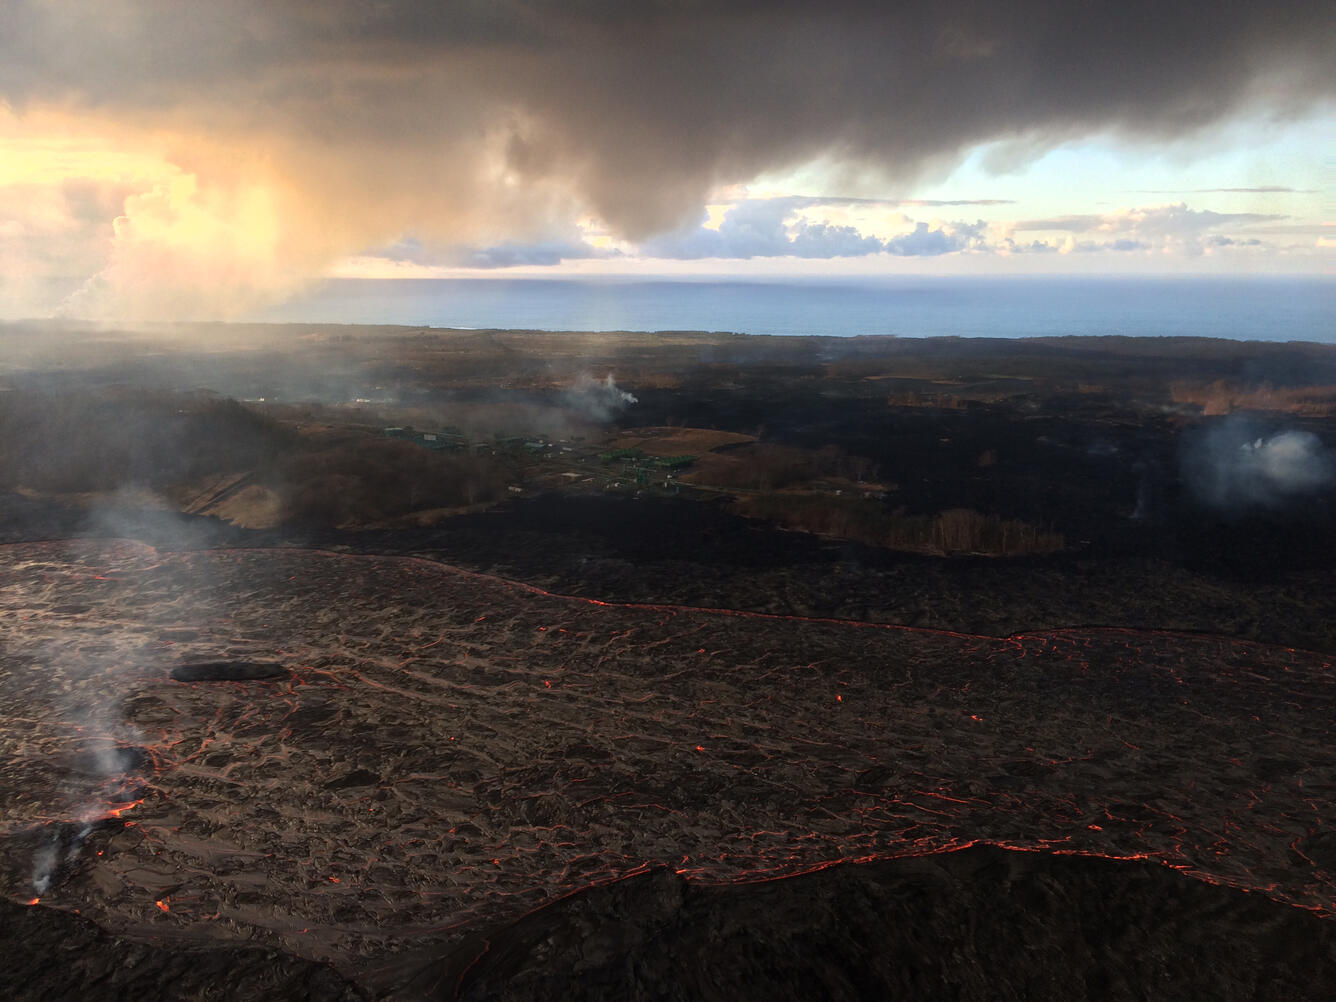 At a wide point in the main channelized fissure 8 lava flow, a ropy...